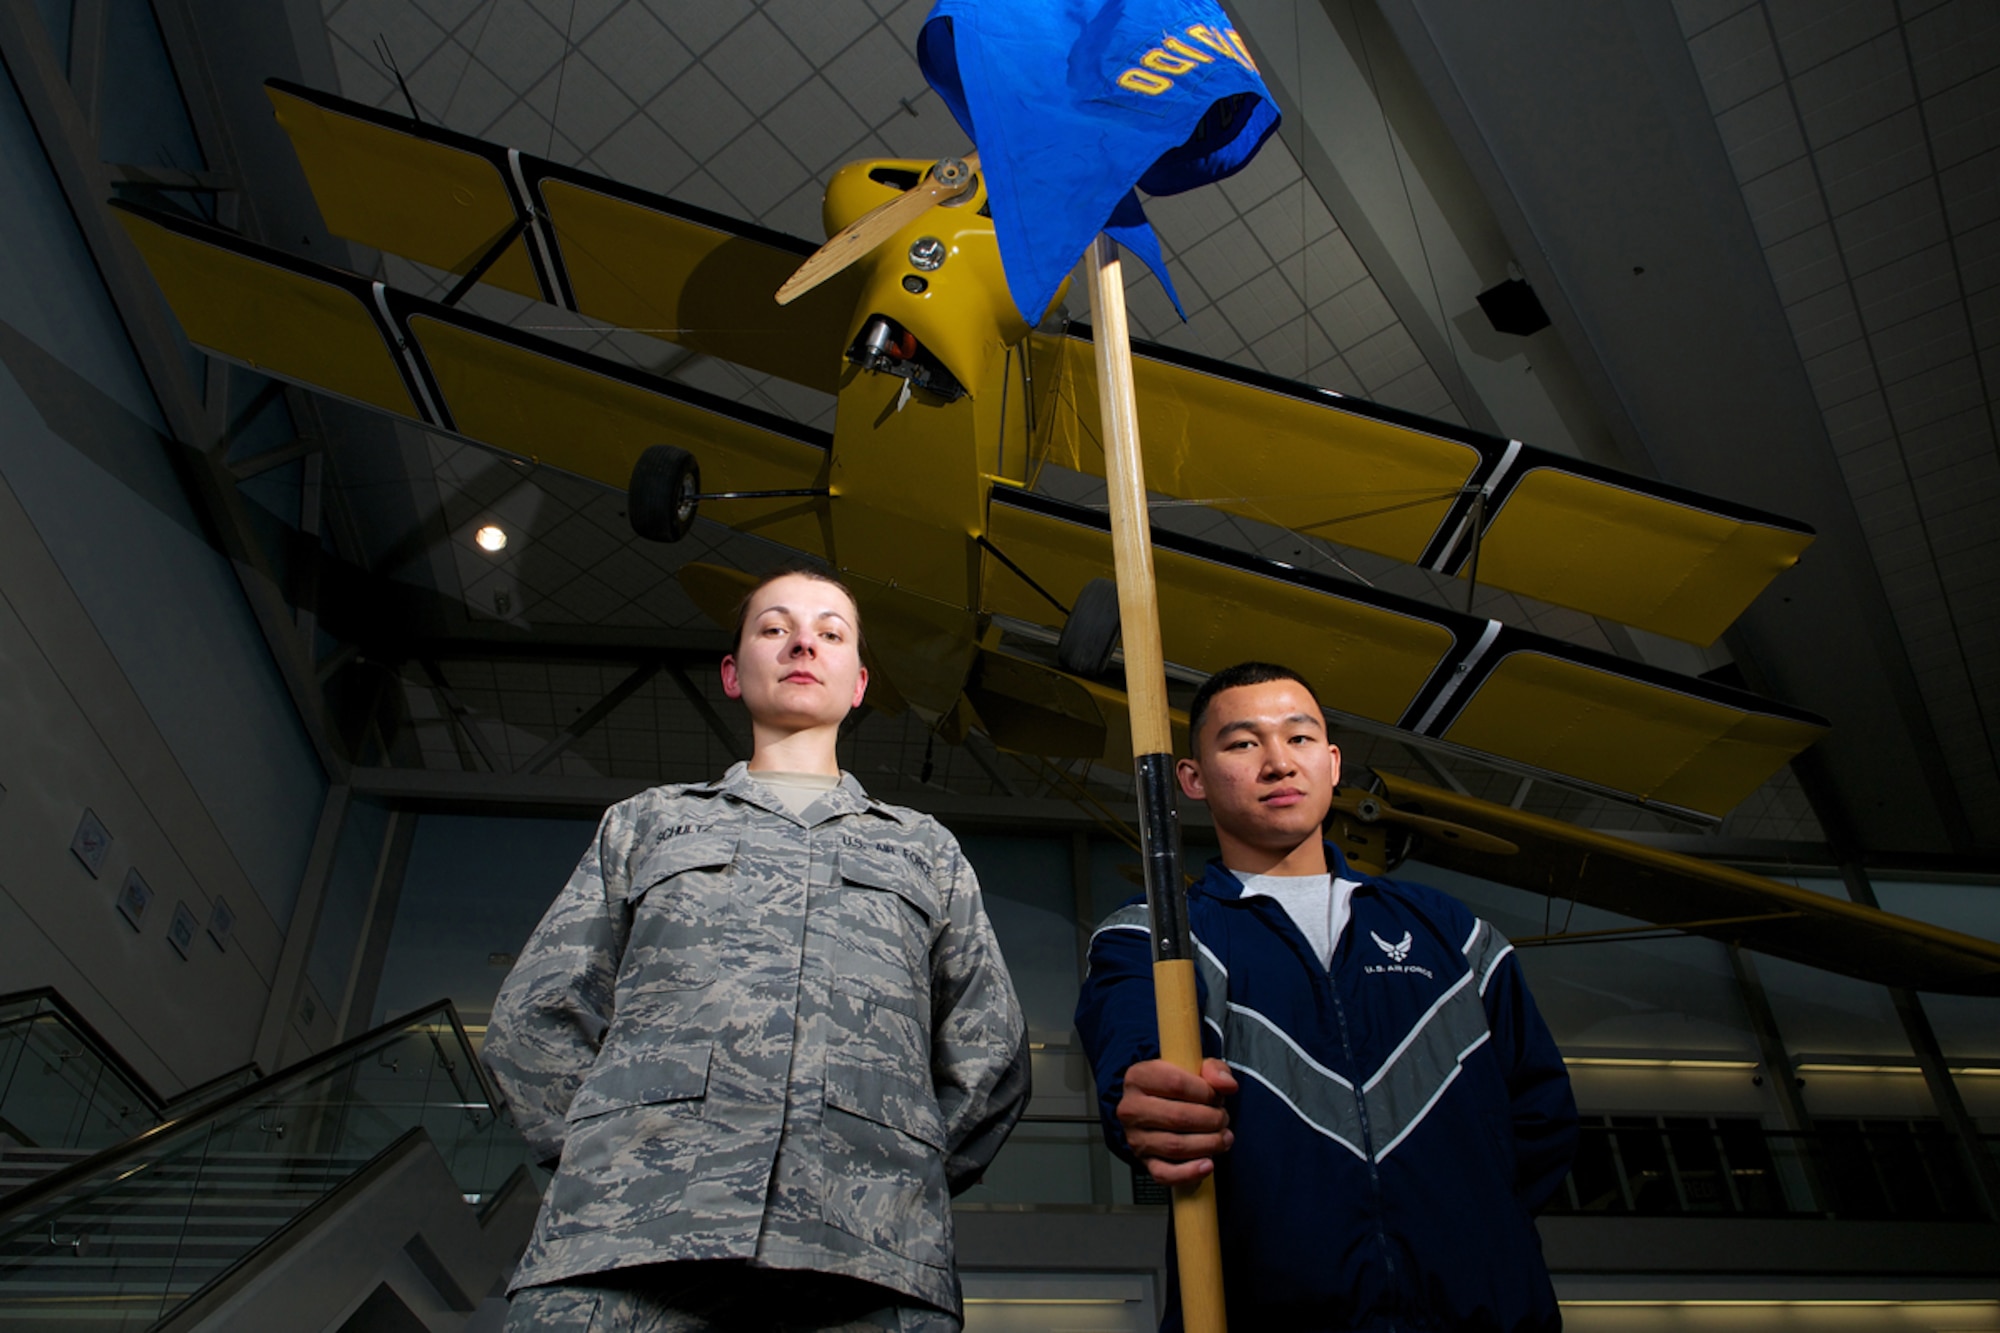 Then Cadet Emily Schultz and Cadet Jonathan Capua stand with the University of Alaska Anchorage Air Force ROTC guidon at the UAA Aviation Technology Building April 25. Schultz is from Fence, Wis., and recently commissioned as an Air Force second lieutenant in space and missile operations. Capua is from Patayak, Santa Barbara, Pagasanan, Philippines, and is concurrently a senior airman in the Air Force Reserve. He plans on commissioning in two years. (U.S. Air Force photo/David Bedard)